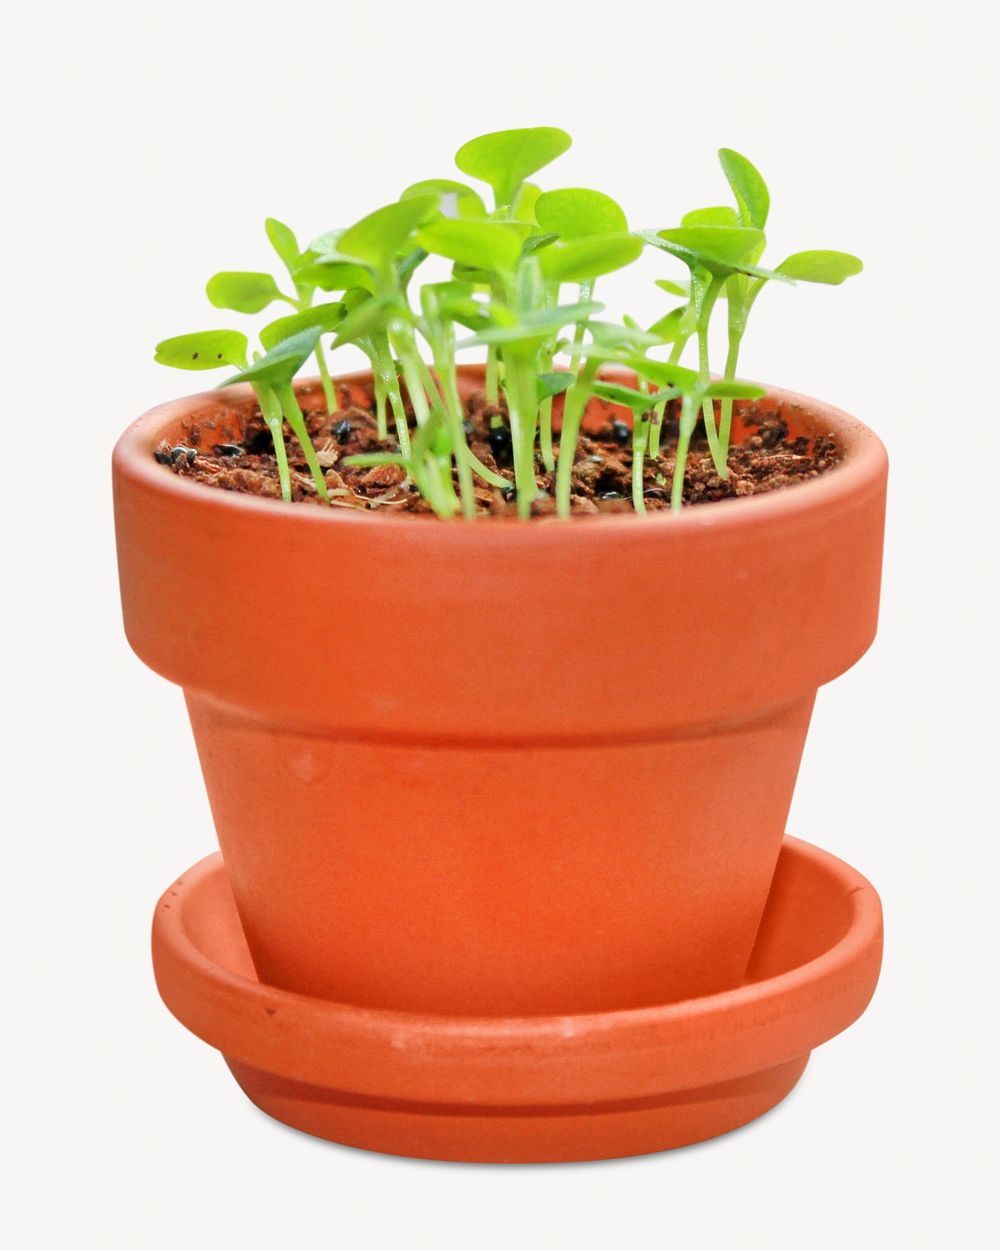 Potted garden plant isolated object on white